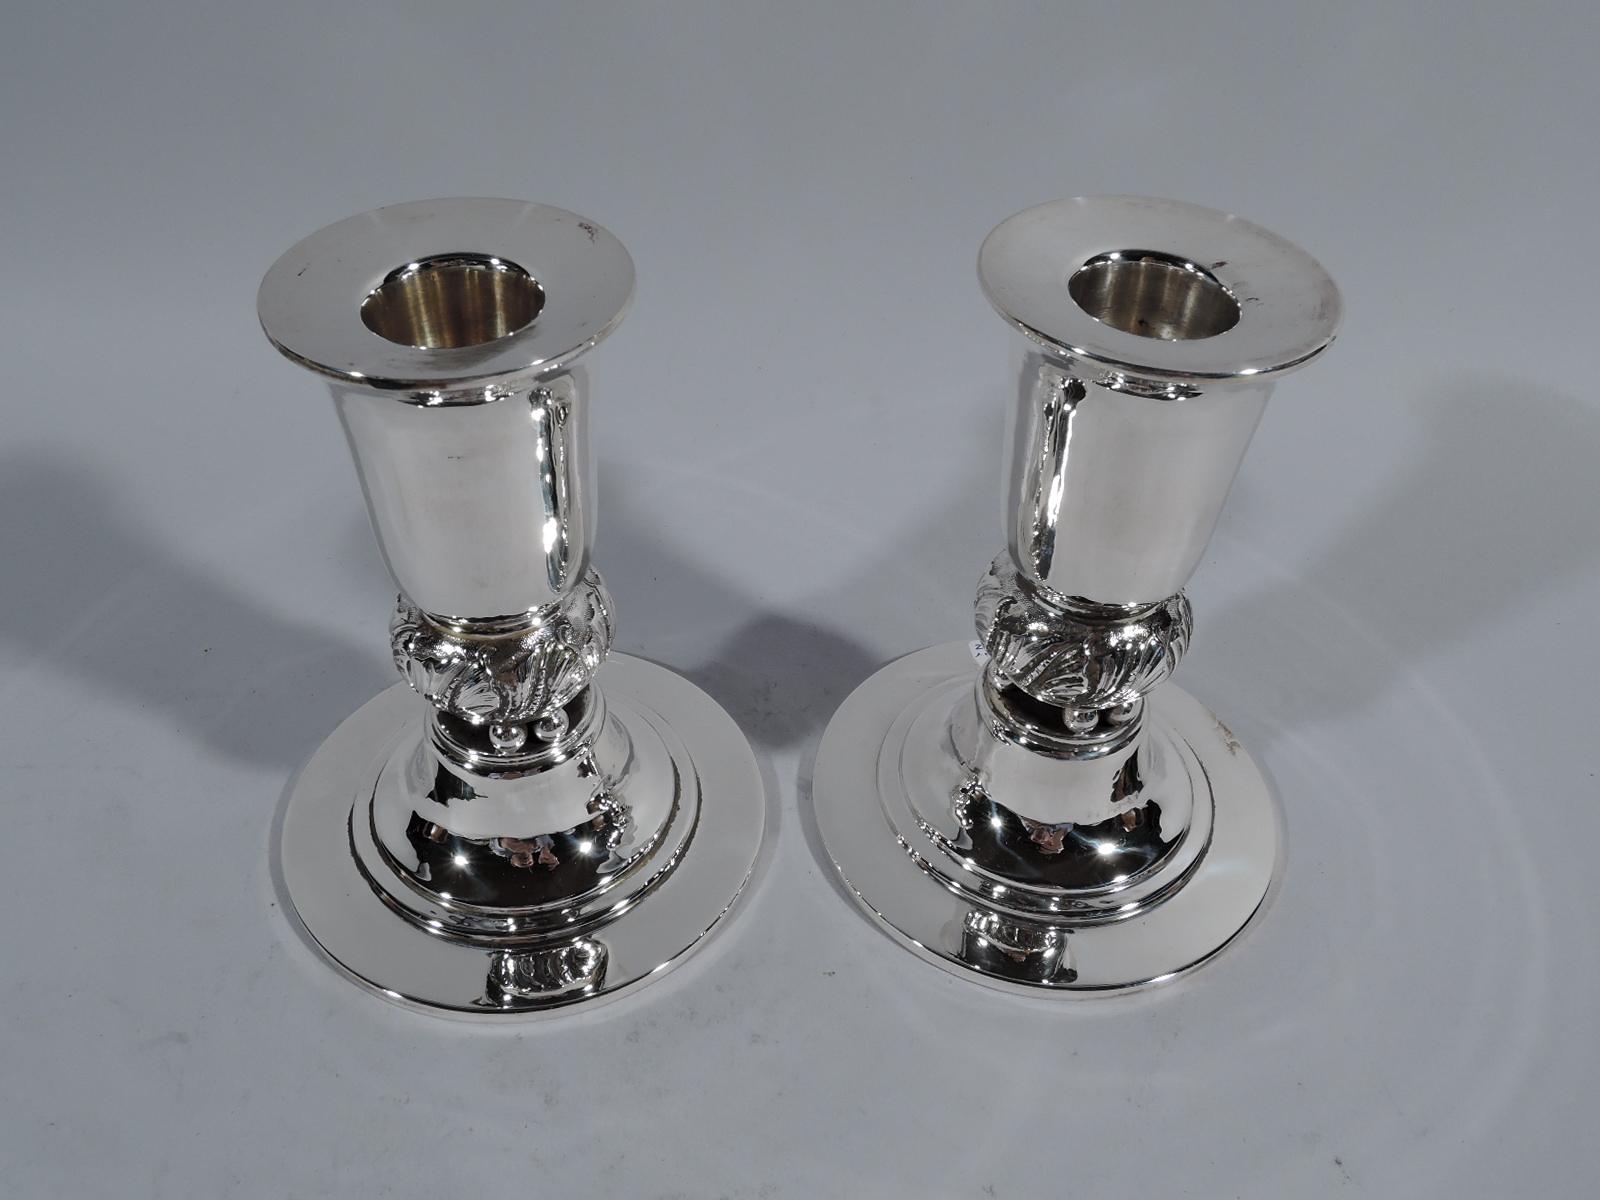 Pair of Mid-Century Modern sterling silver candlesticks. Retailed by Georg Jensen, Inc. USA in New York. Tall urn socket with wide flat rim. Bulbous knop with tooled leaves mounted to beads in turn mounted to stepped and domed foot. Fully marked and